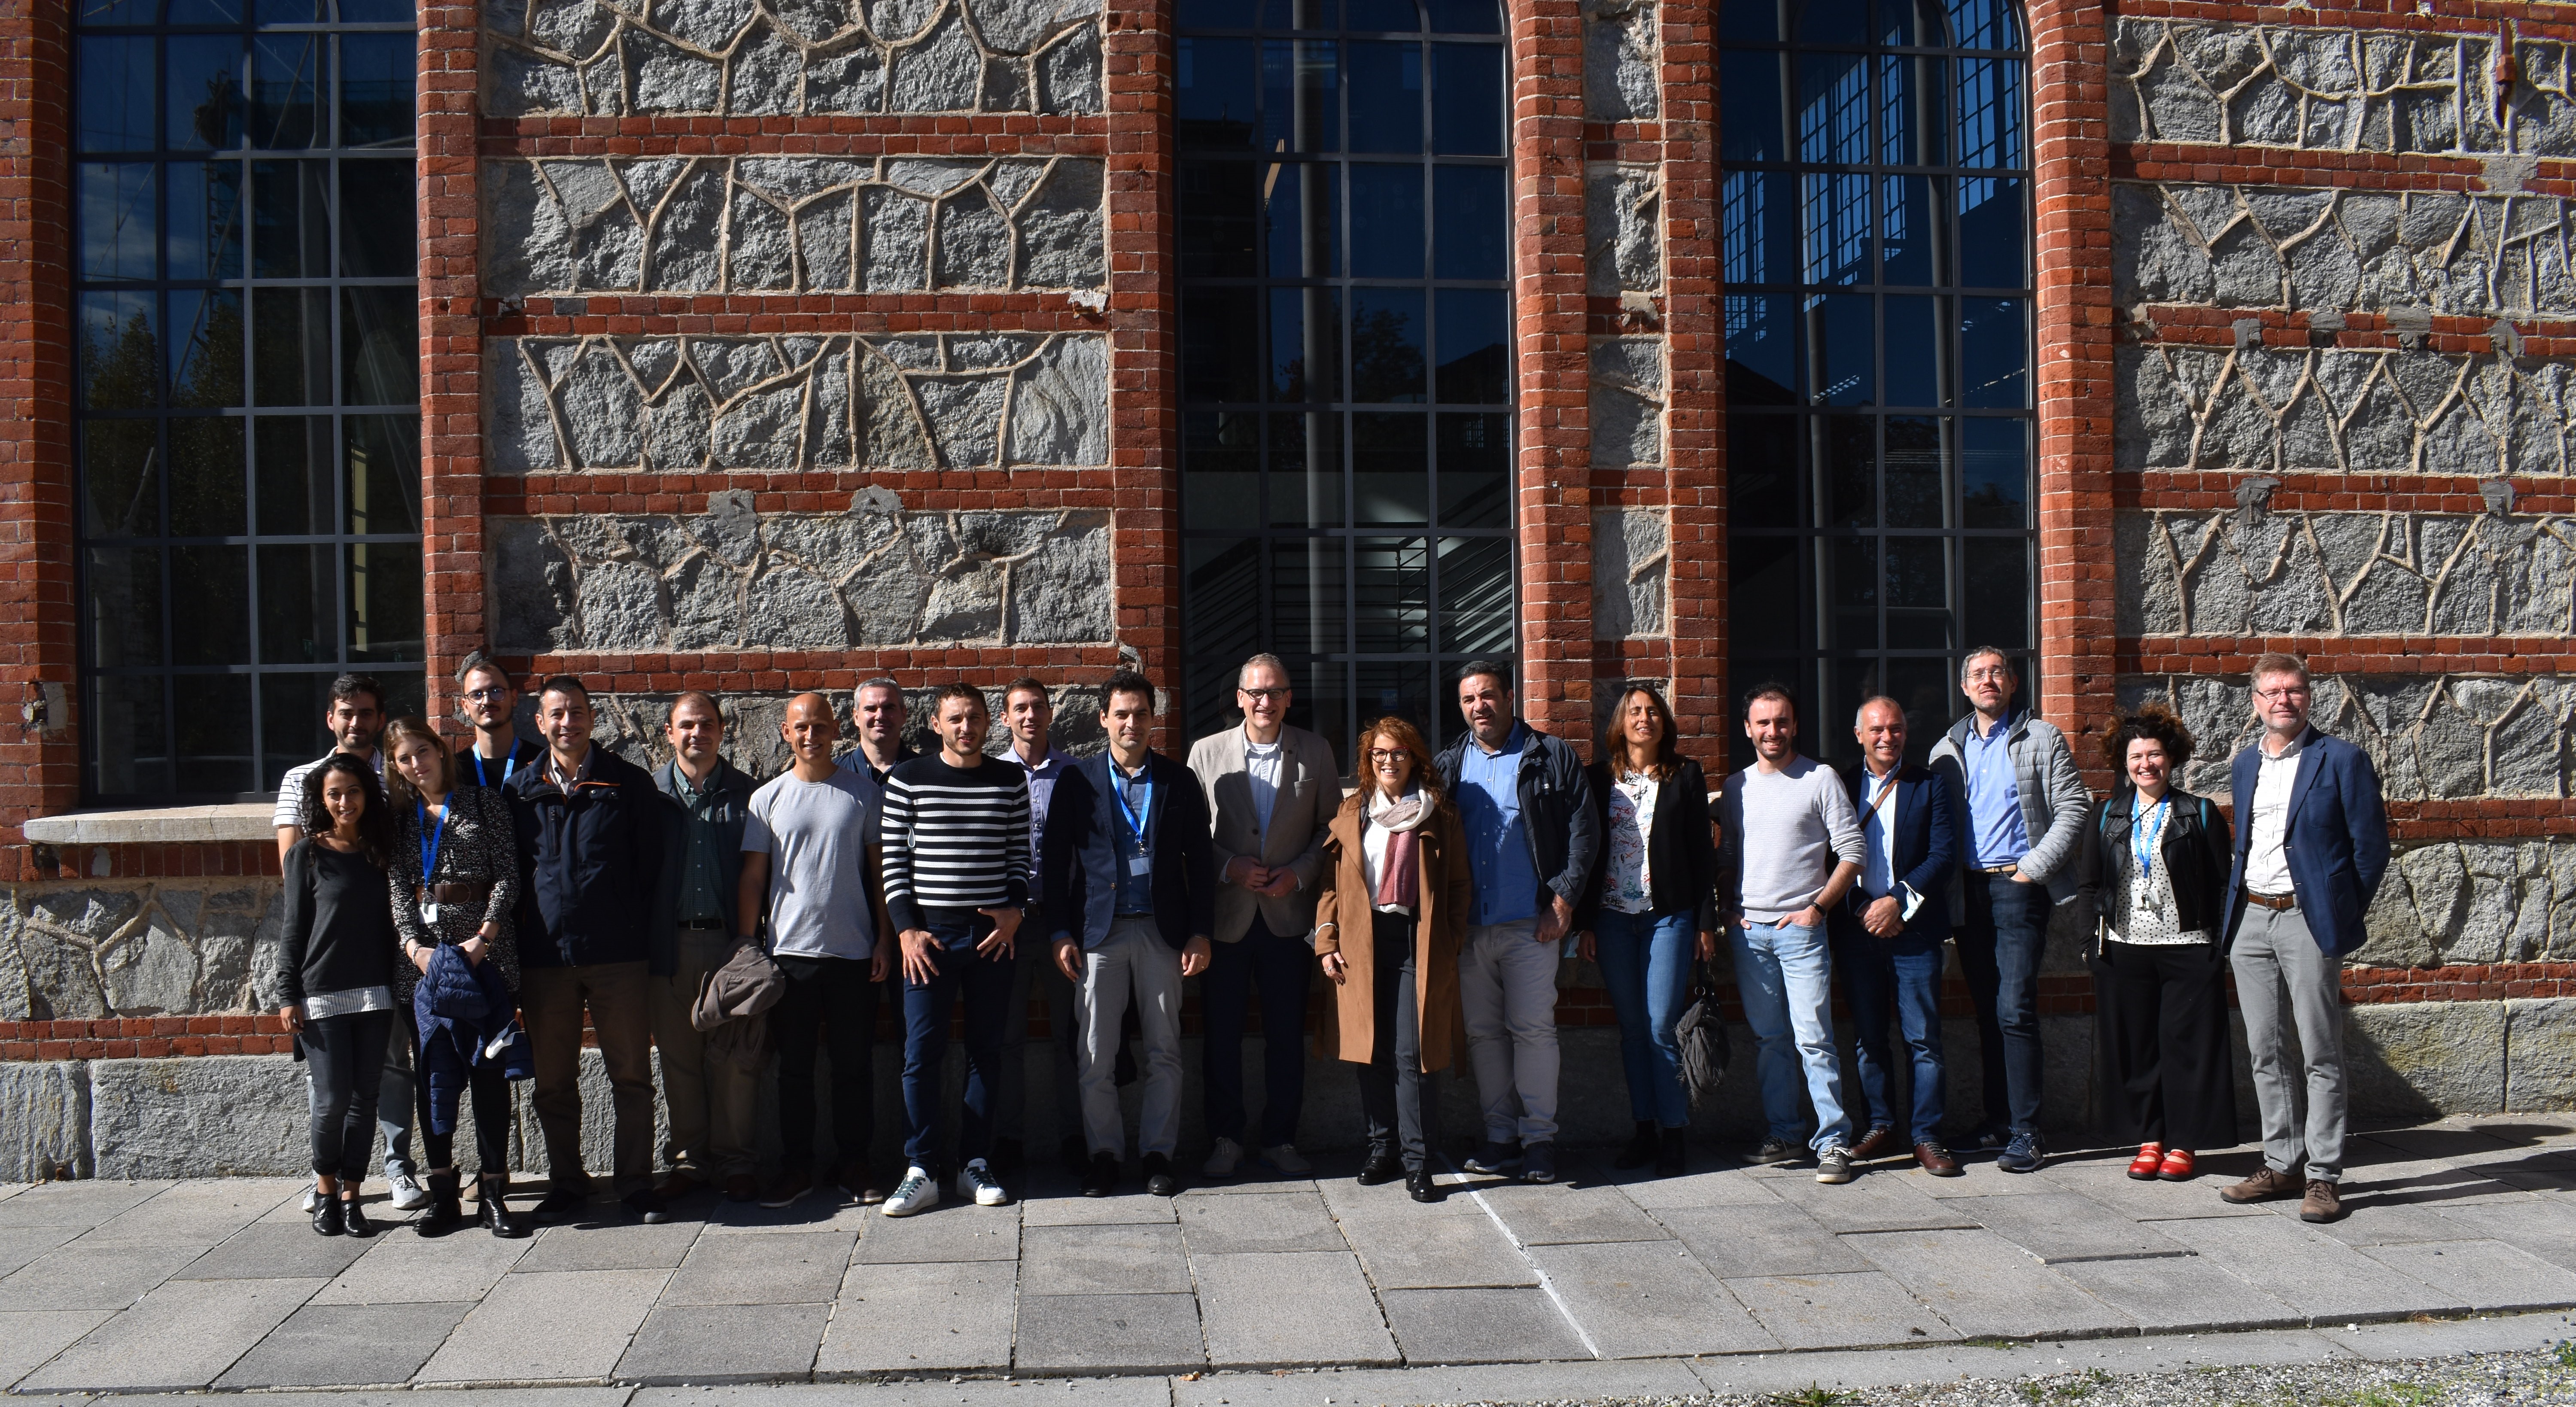 SAFERS 2nd General Assembly & Design Review Fruitfully Concluded